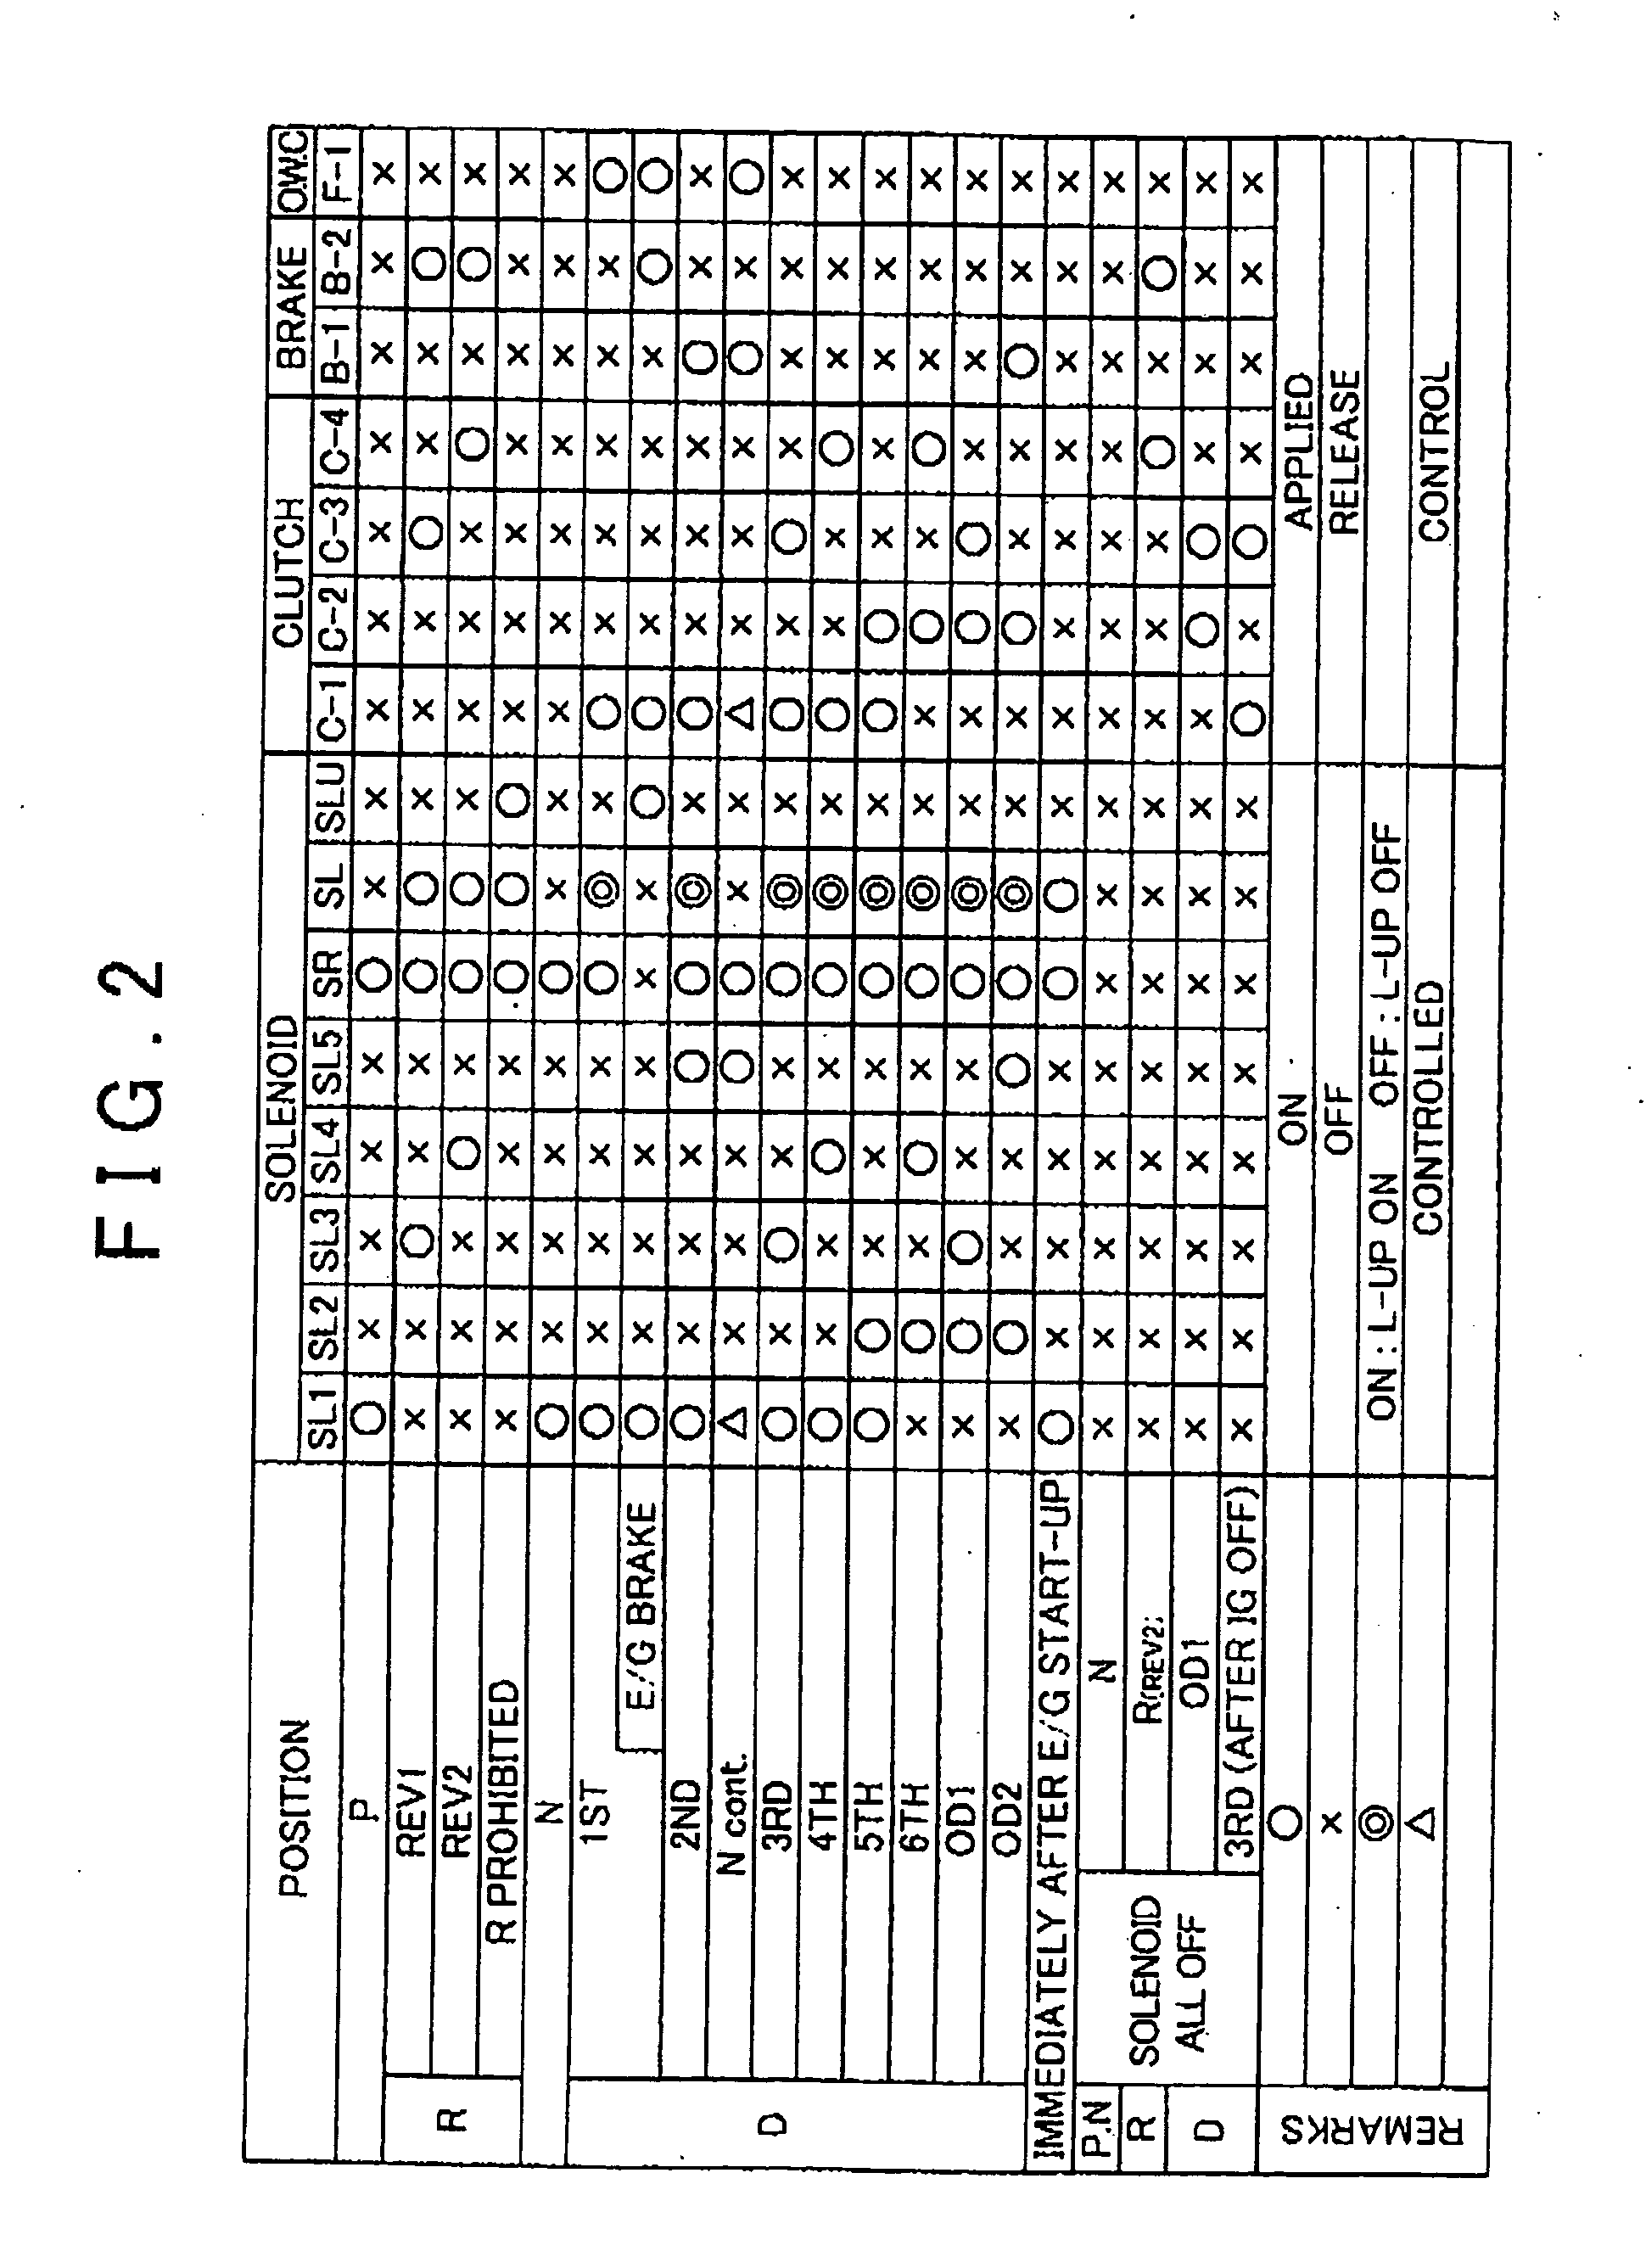 Hydraulic control apparatus for an automatic transmission